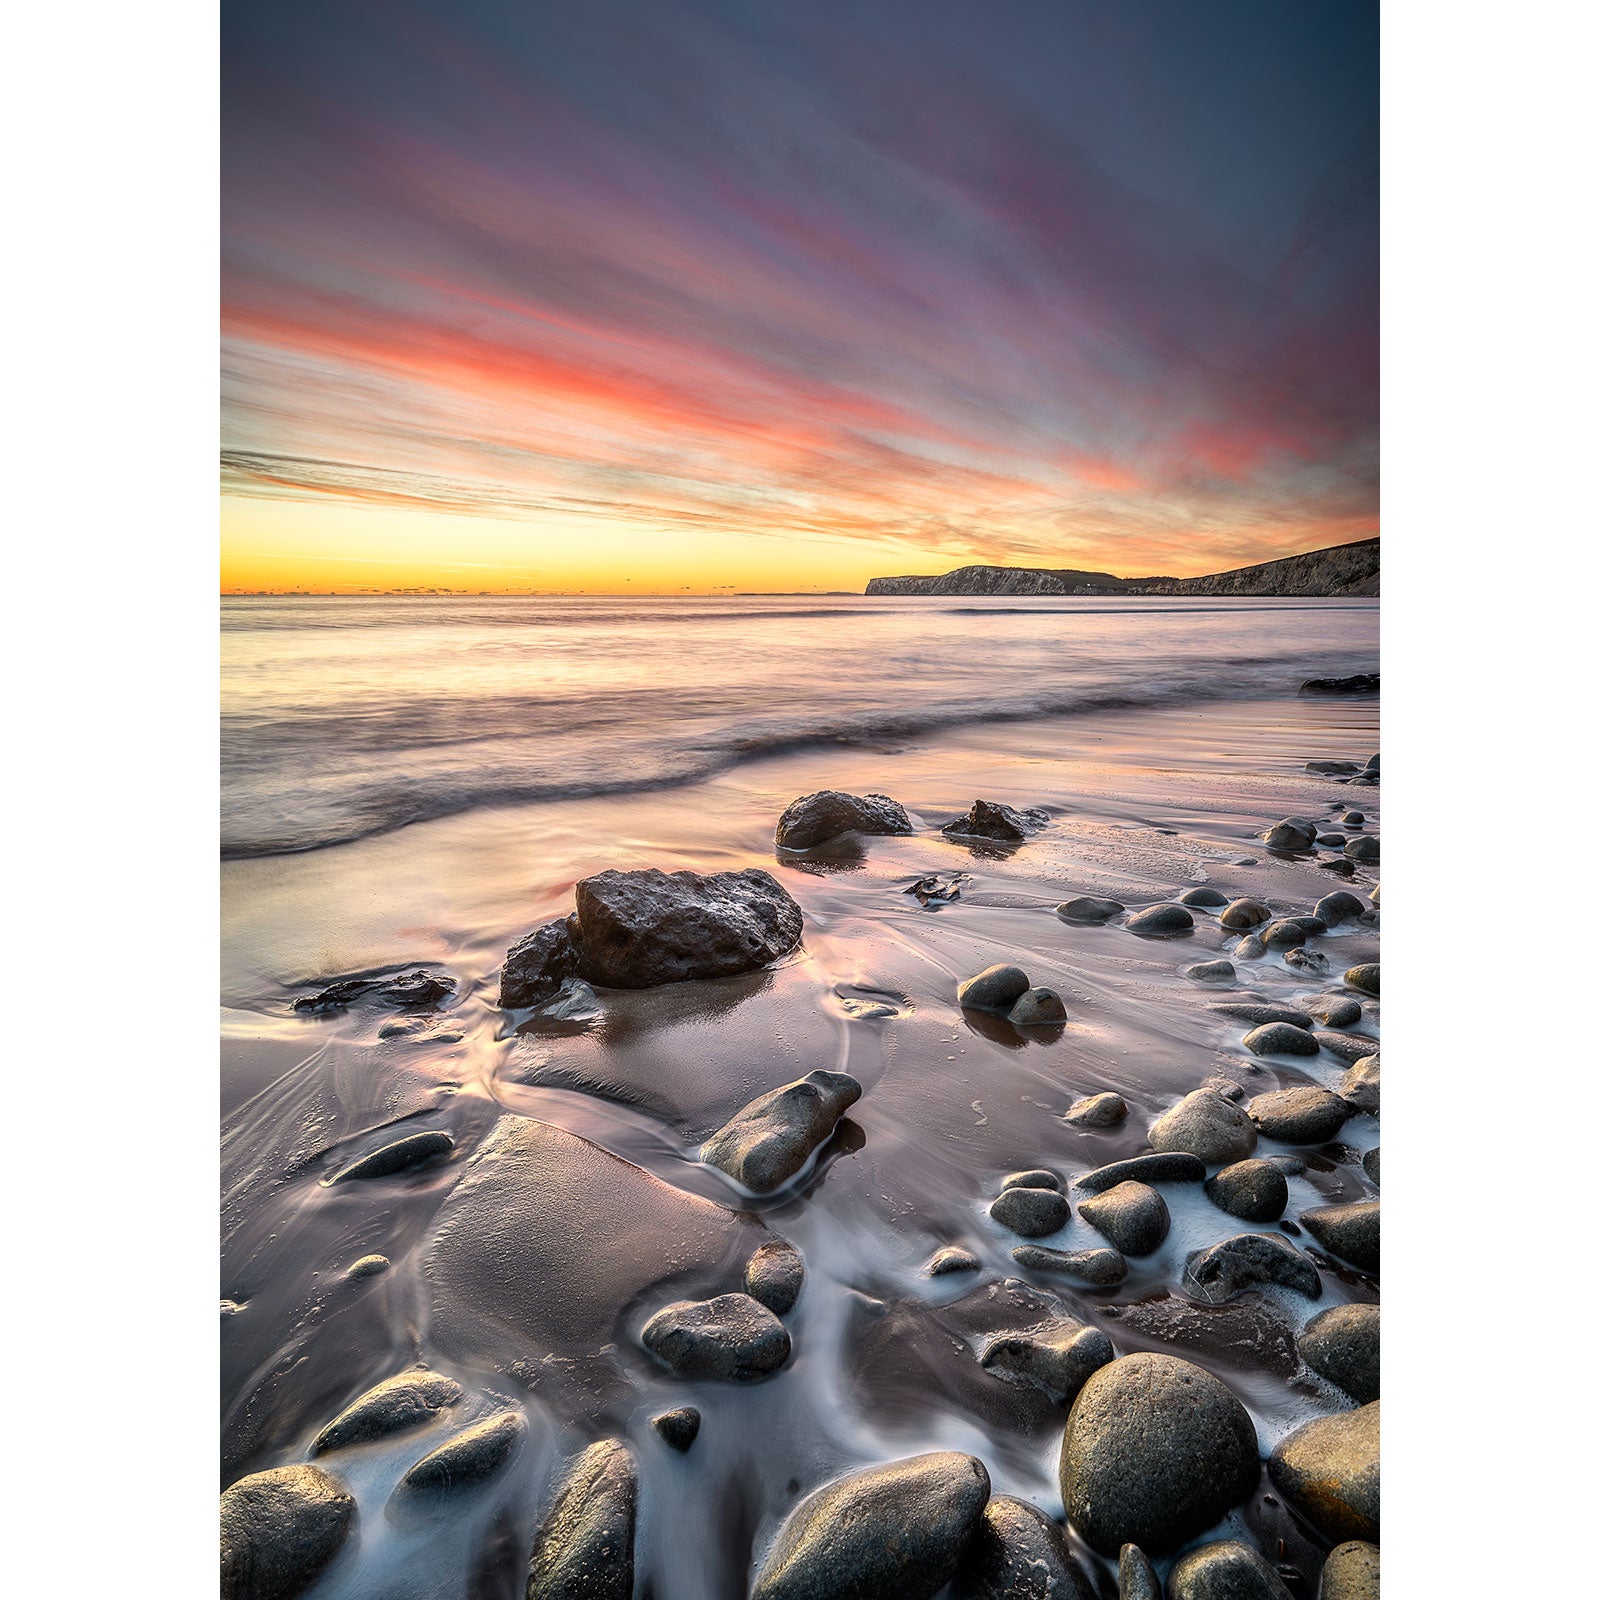 Seaside sunset at Compton Bay on the Isle of Wight with colorful sky and smooth pebbles on wet sand. (Available Light Photography)